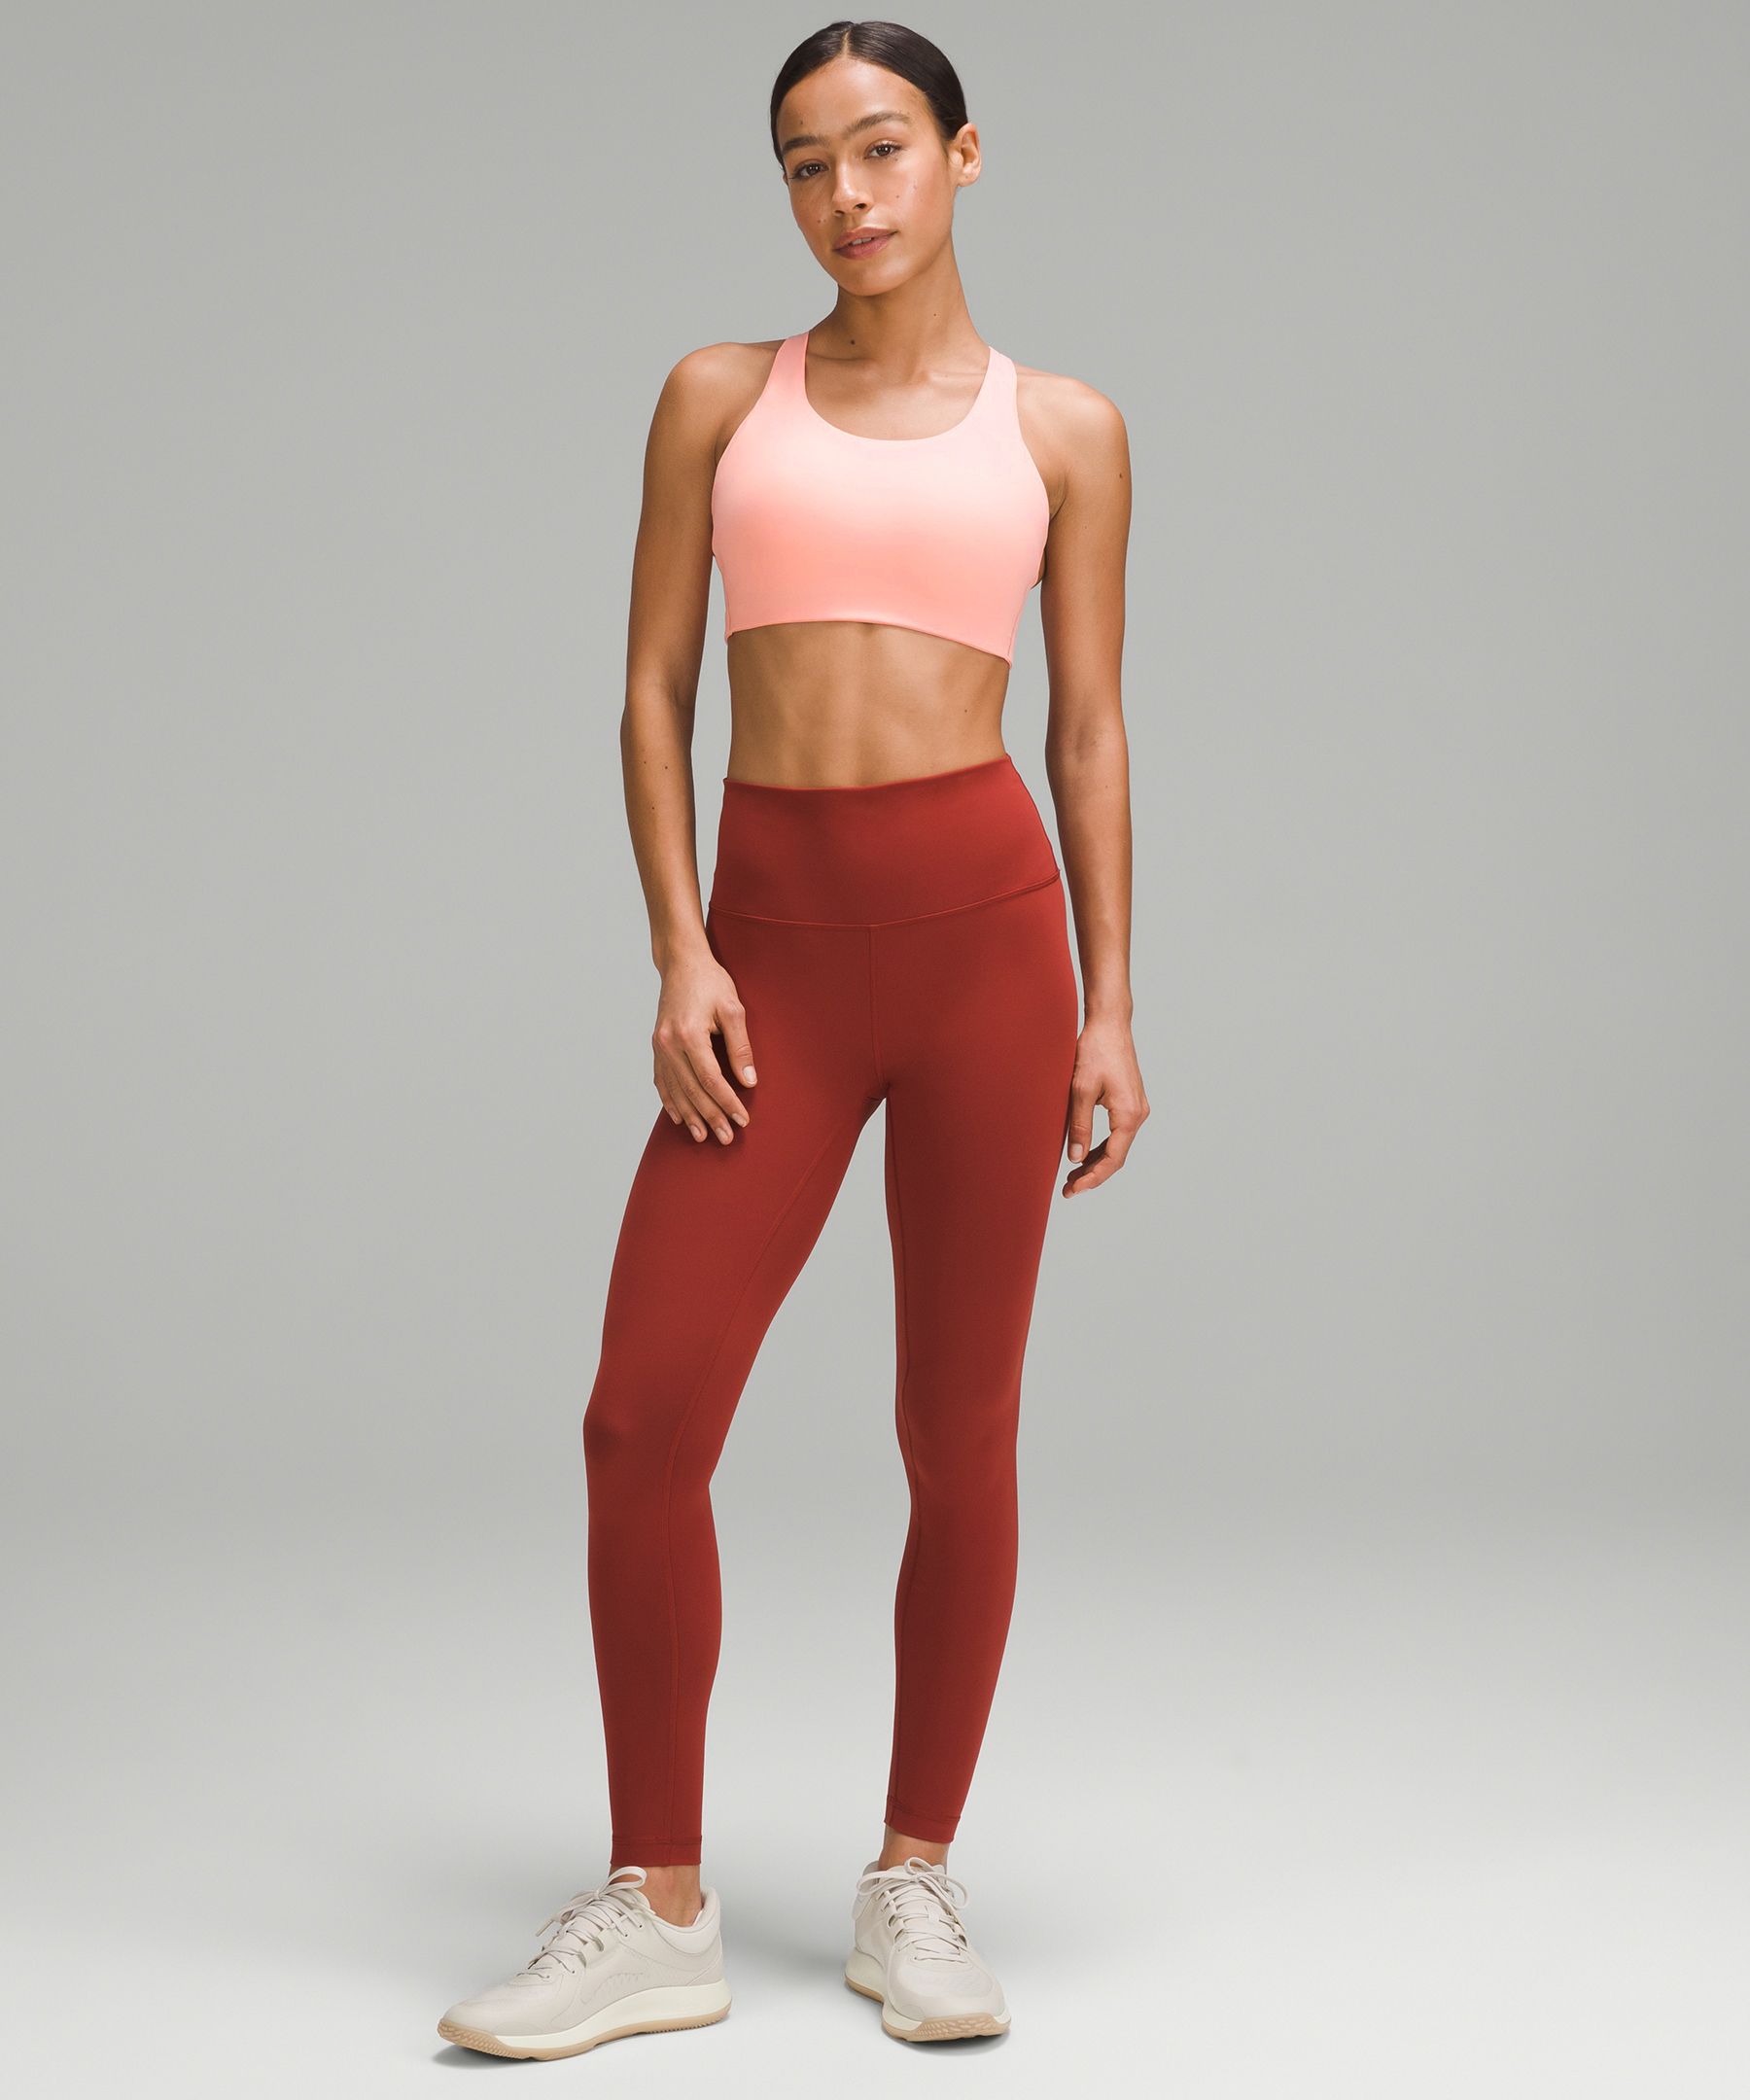 Lululemon AirSupport Bra Size 36DDD NWT Brier Rose/Pink Puff (High Support)  Pink - $48 (51% Off Retail) New With Tags - From LiftUp